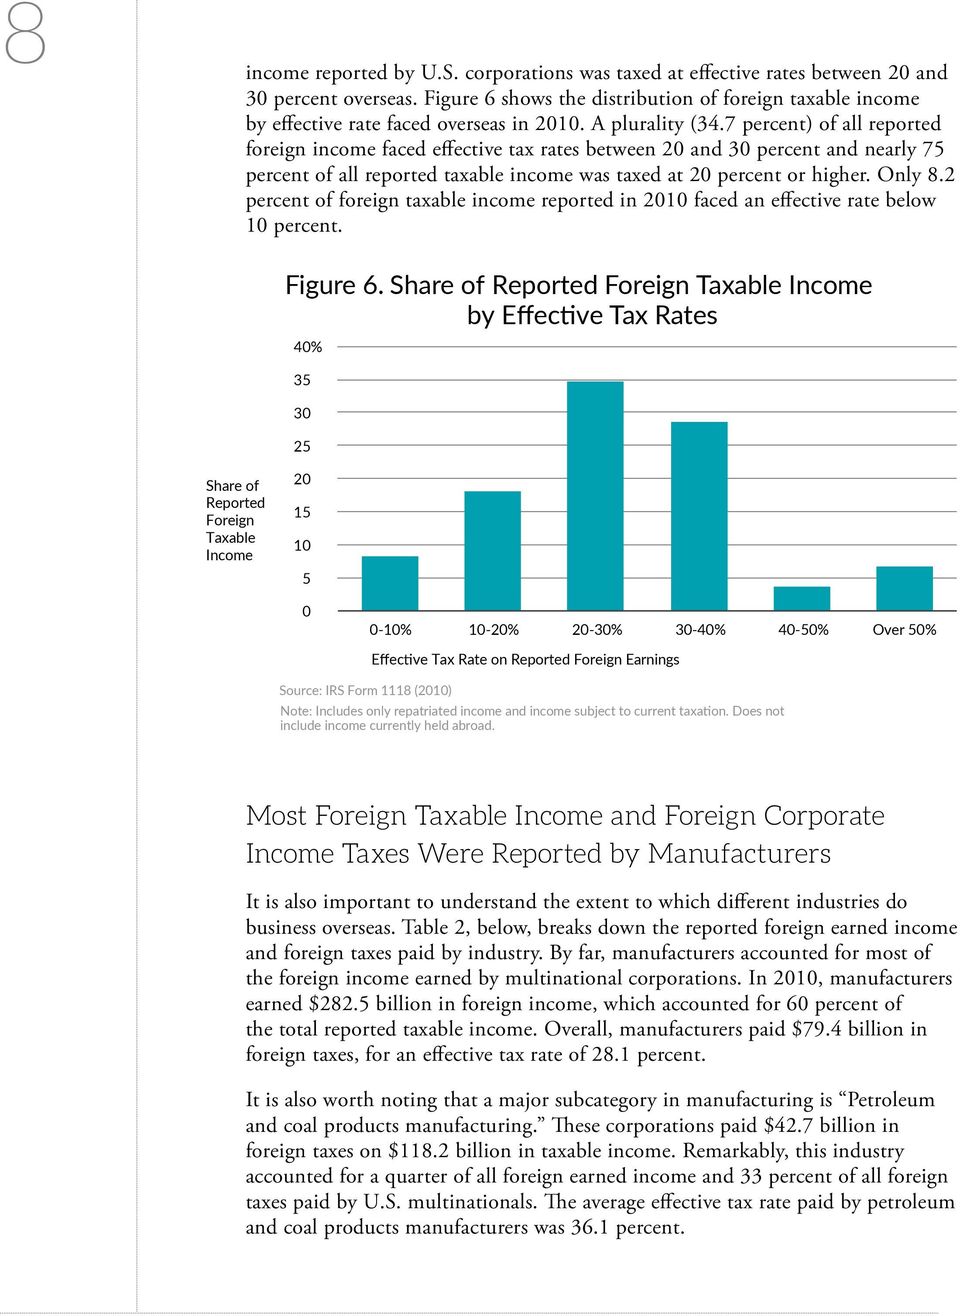 7 percent) of all reported foreign income faced effective tax rates between 20 and 30 percent and nearly 75 percent of all reported taxable income was taxed at 20 percent or higher. Only 8.